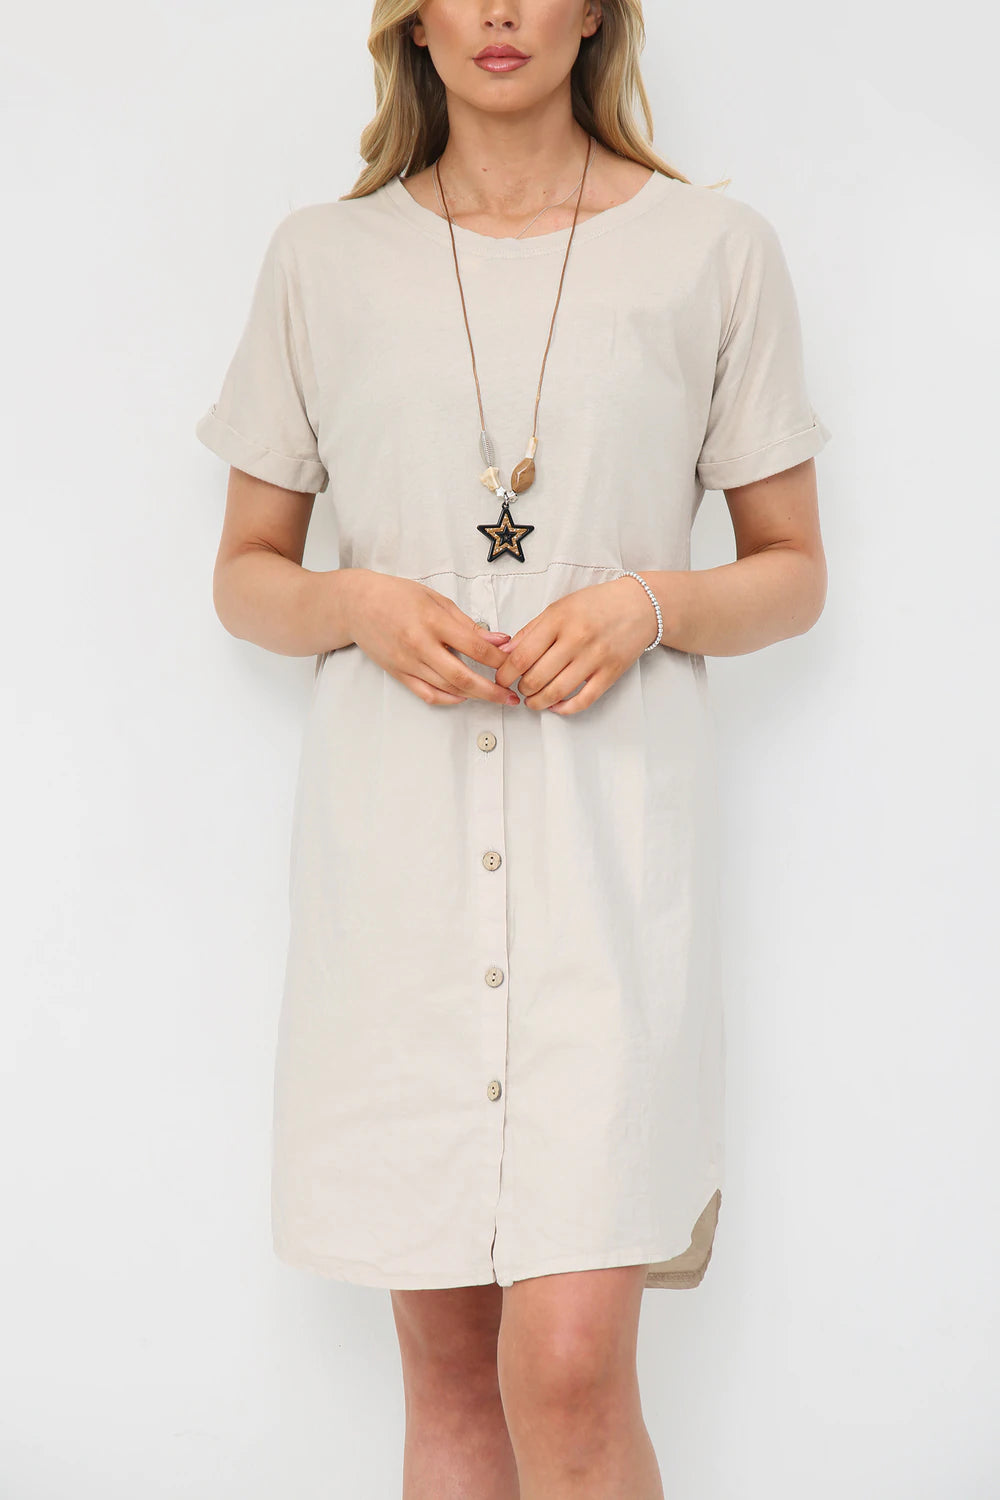 100% Cotton Dress With Necklace